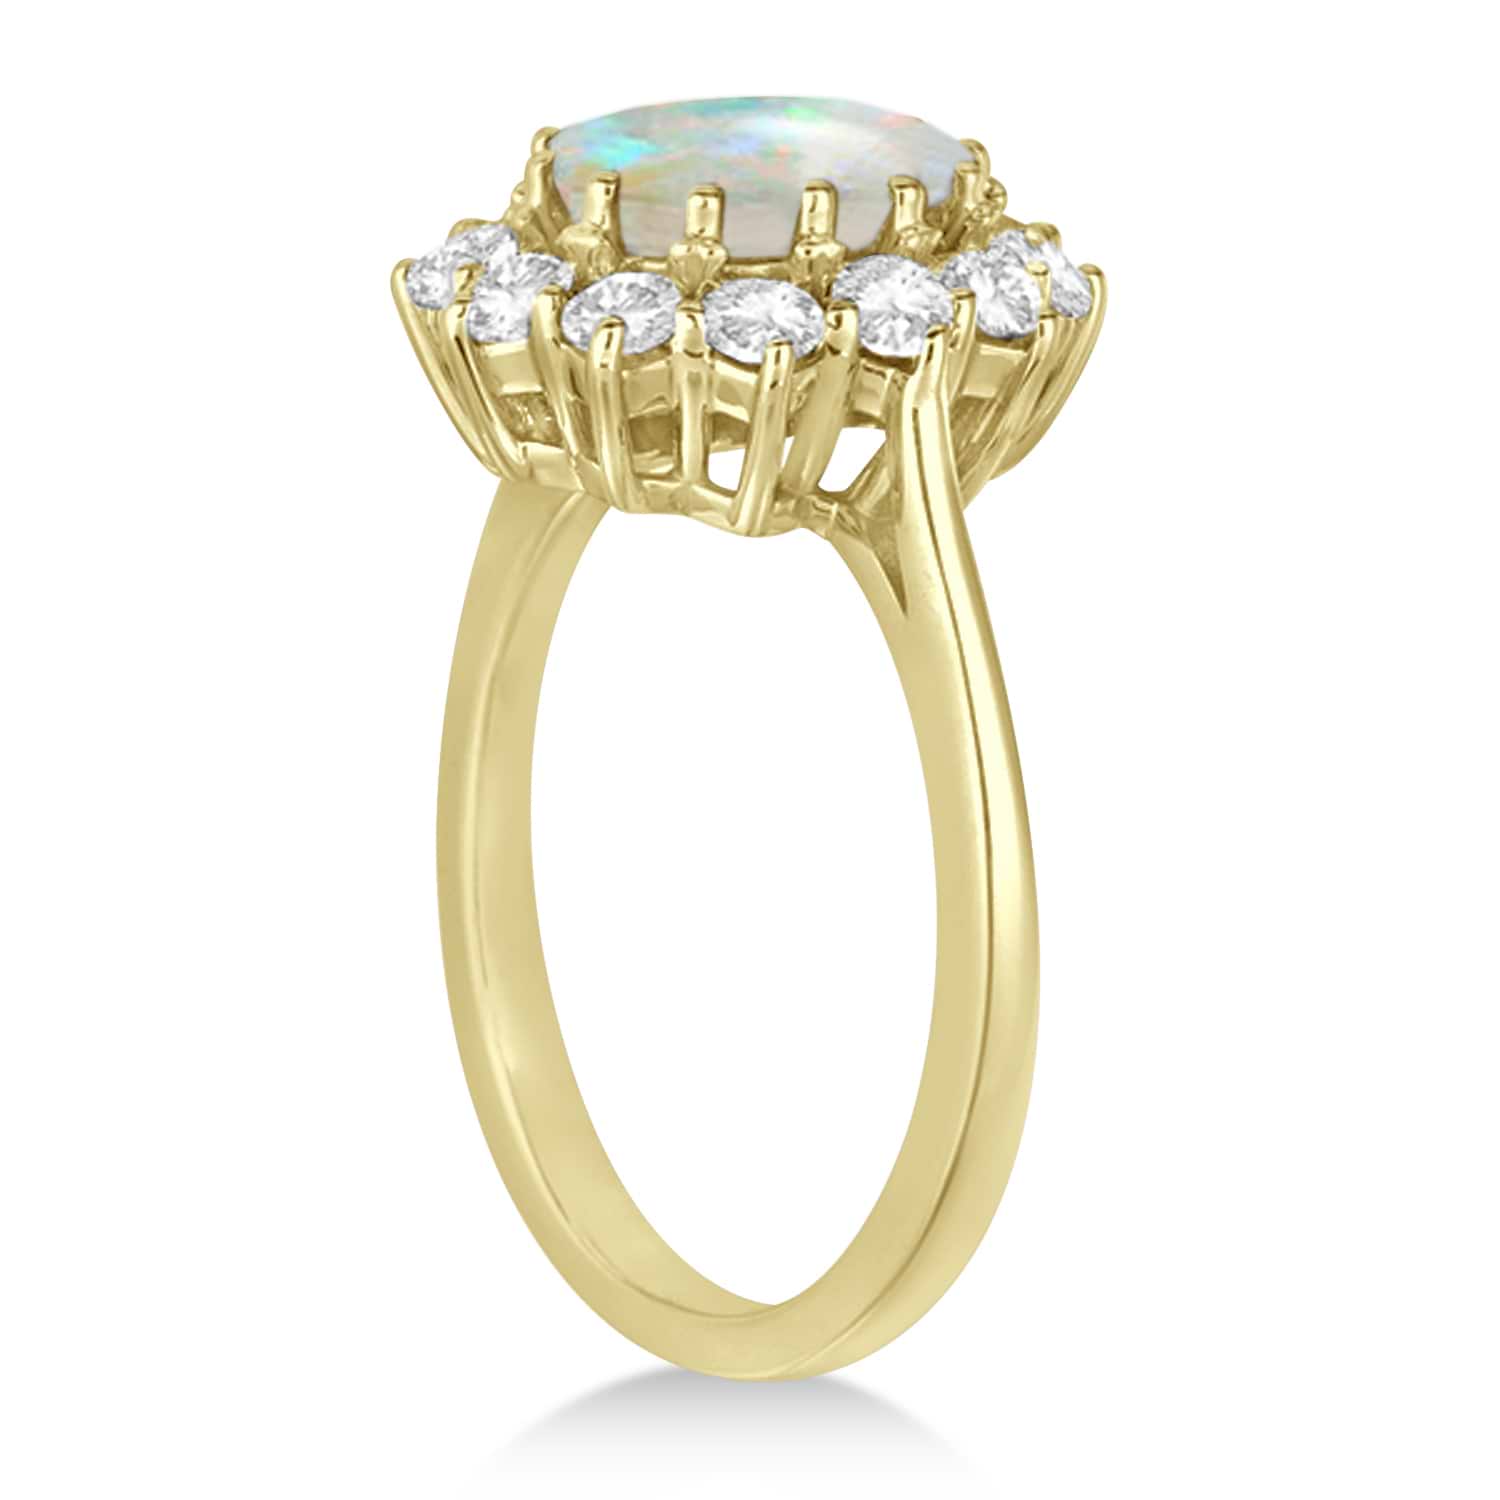 Oval Shape Opal & Diamond Accented Ring in 14k Yellow Gold (3.60ctw)